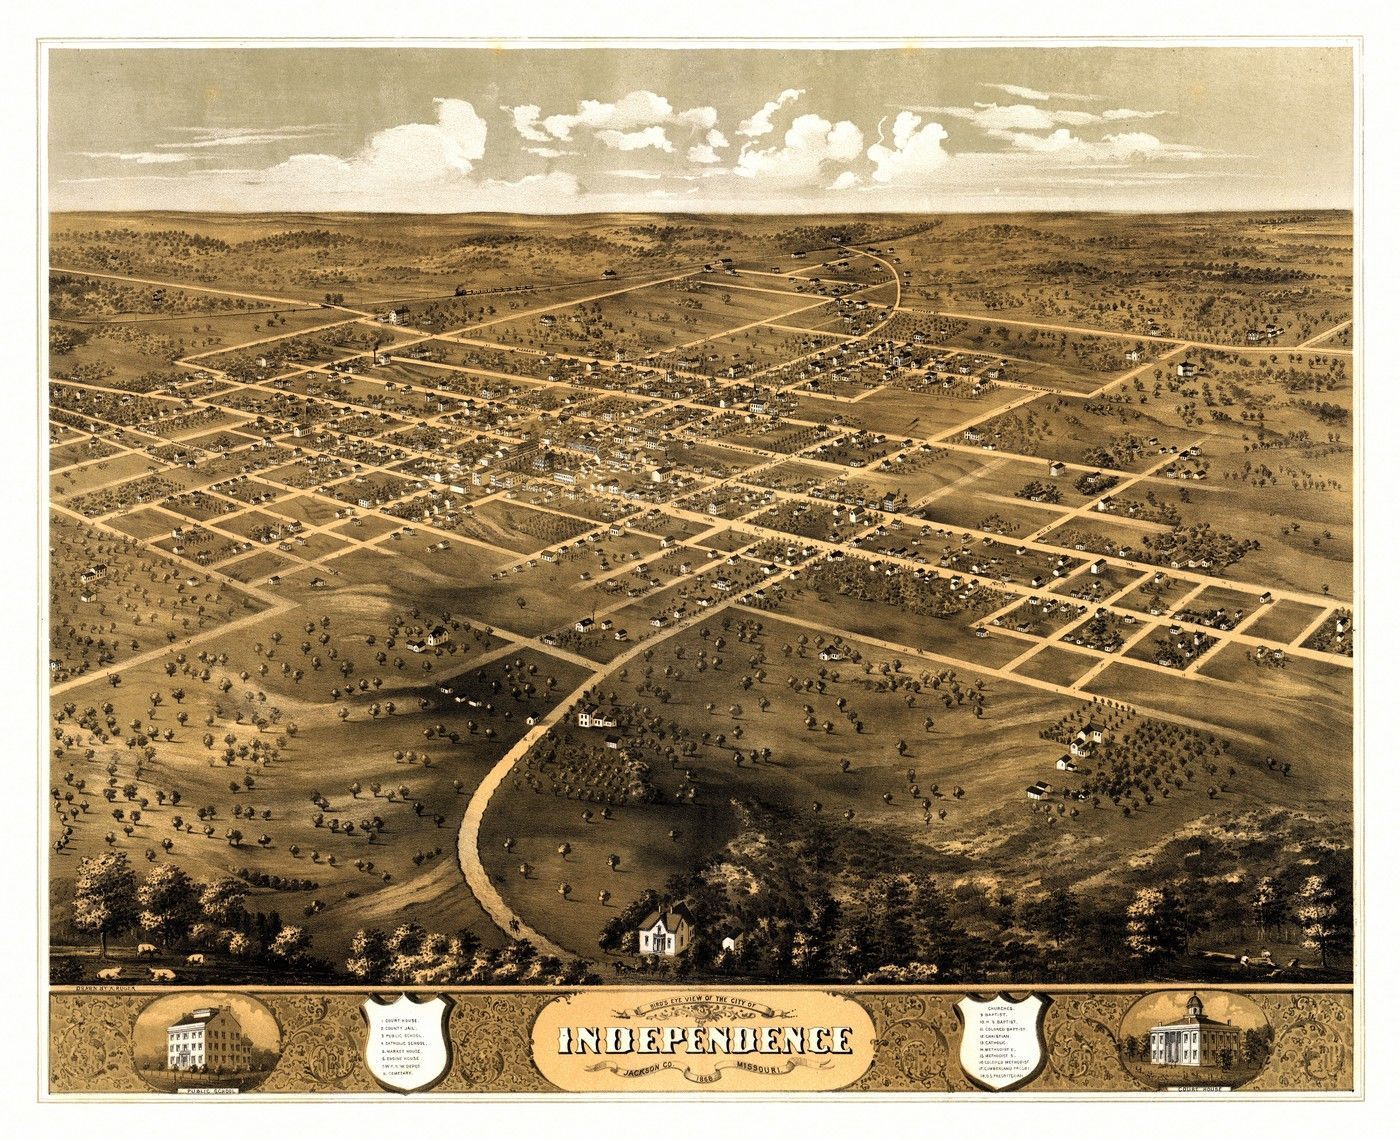 A birds-eye view of Independence, Missouri in 1868. [source](https://www.pinterest.com/pin/371265563013951241/)